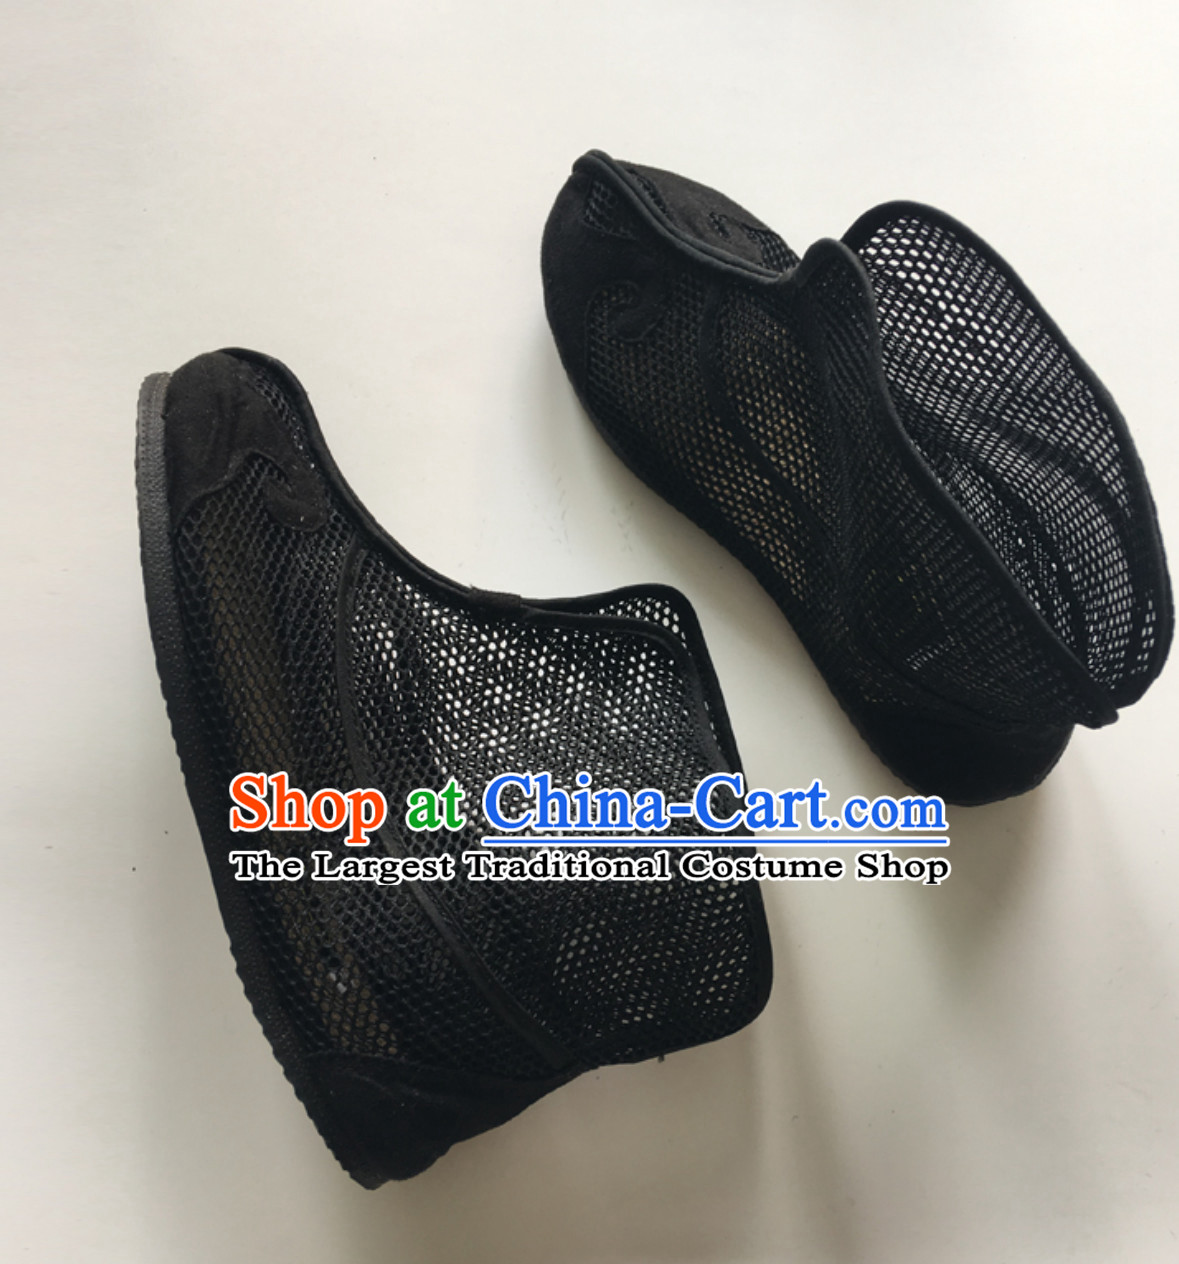 Ancient Chinese Style Mesh Black Boots for Men